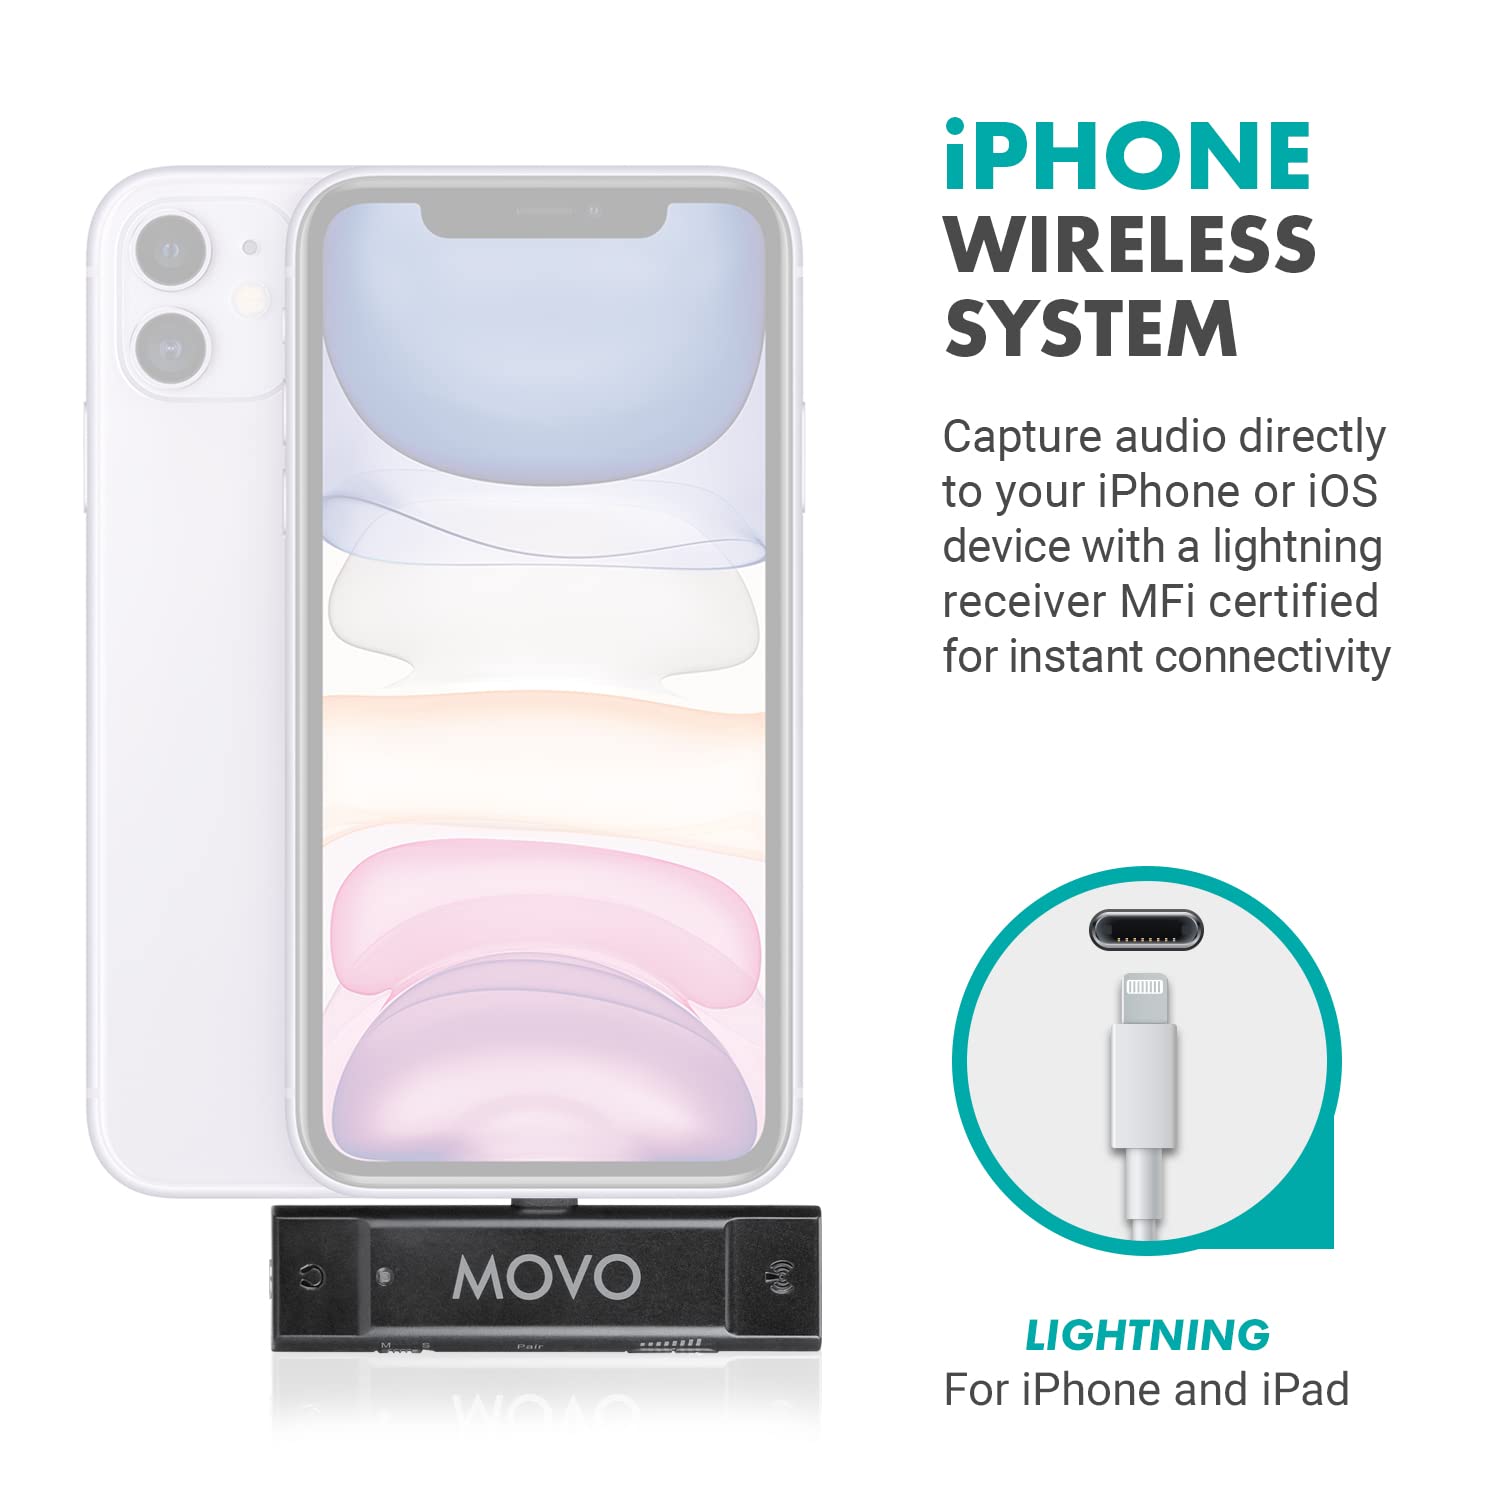 Movo Creator Video Kit with VGC-30 LED Ring Light, Tripod Stand, and Edge-DI Wireless Lavalier Microphone for iPhone- Selfie Ring Light with Tripod Stand - Complete iPhone Wireless System for Vlogs  - Very Good